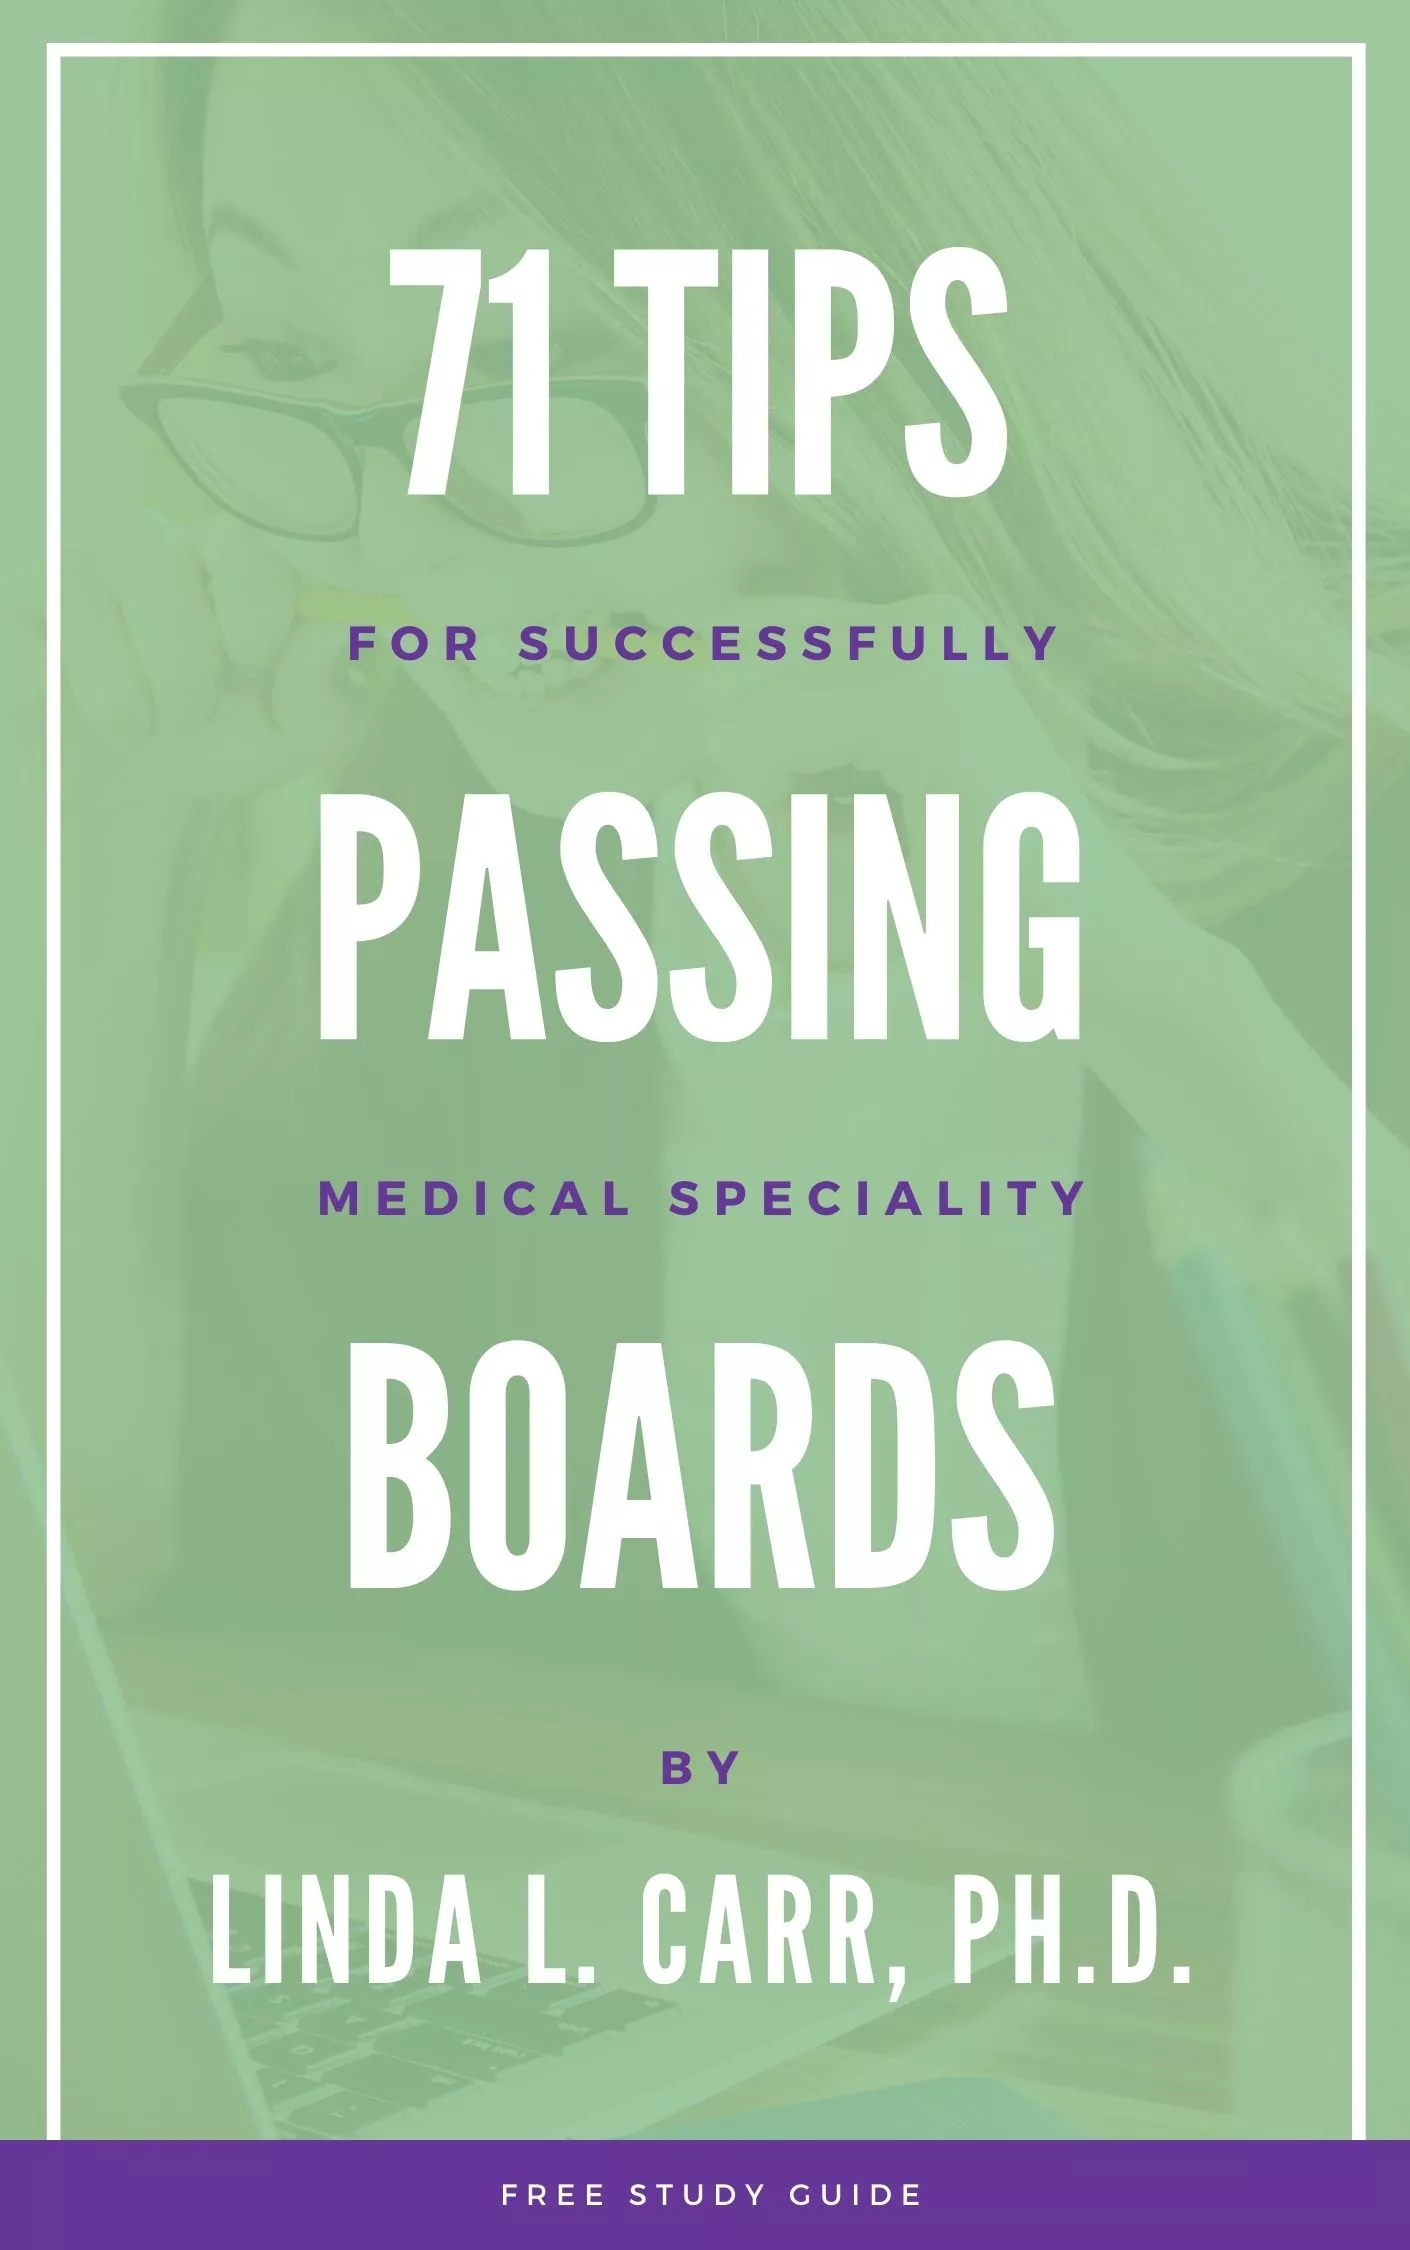 Free study guide 71 Tips for Successfully Passing Medical Specialty Boards by Linda L. Carr, Ph.D.